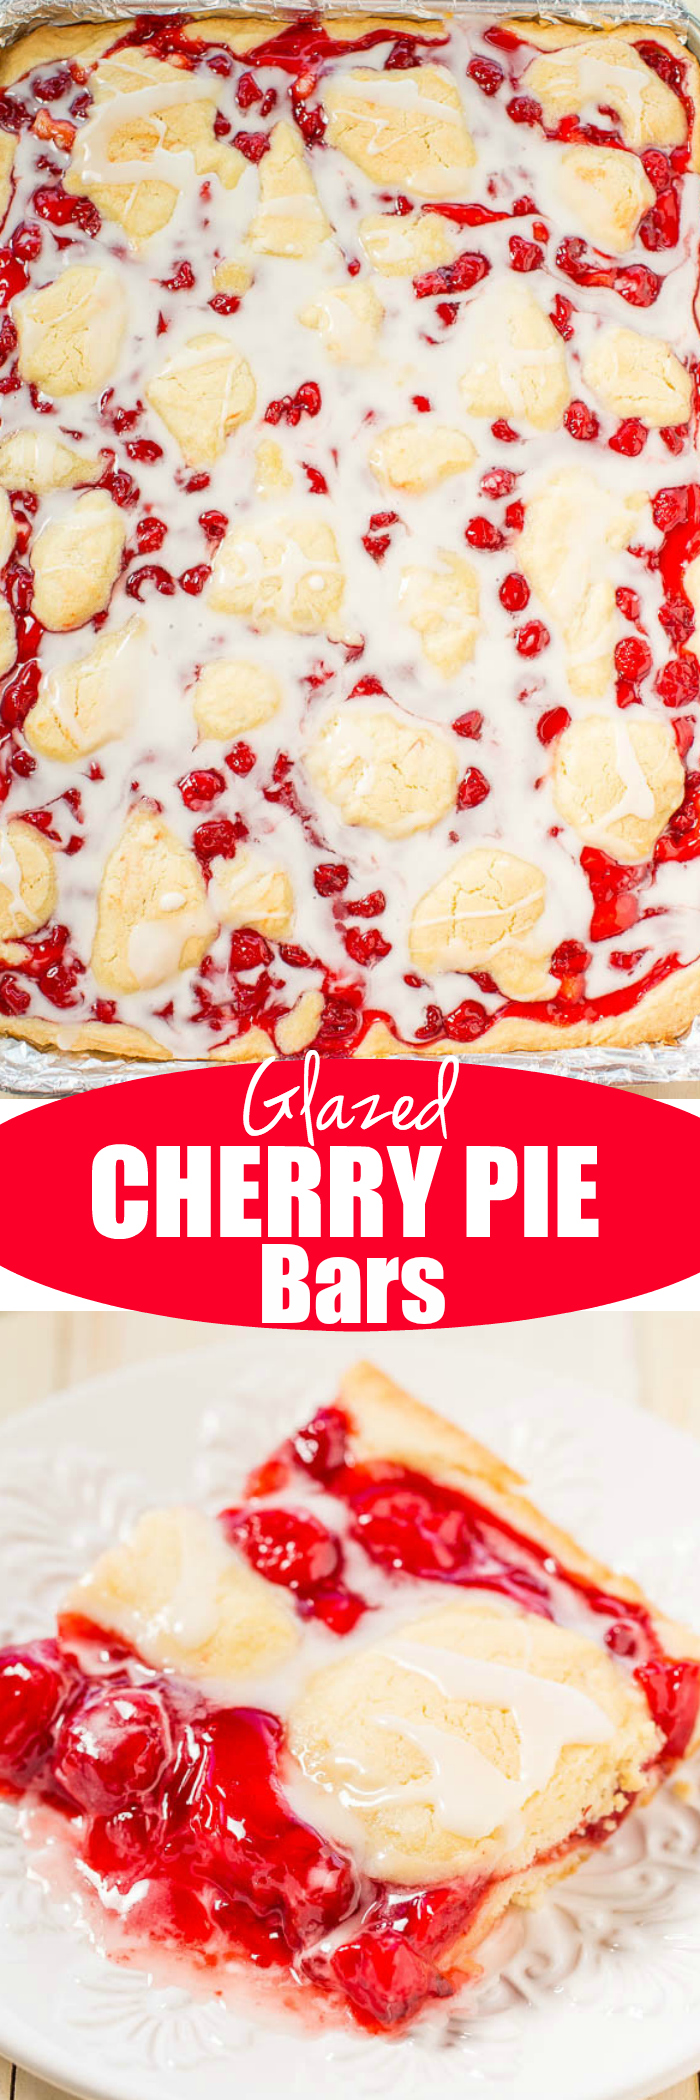 Glazed Cherry Pie Bars - Just like your favorite cherry pie but way easier!! A no-roll crust with juicy cherries and topped with a sweet glaze! Perfect for parties, events, and holidays!!